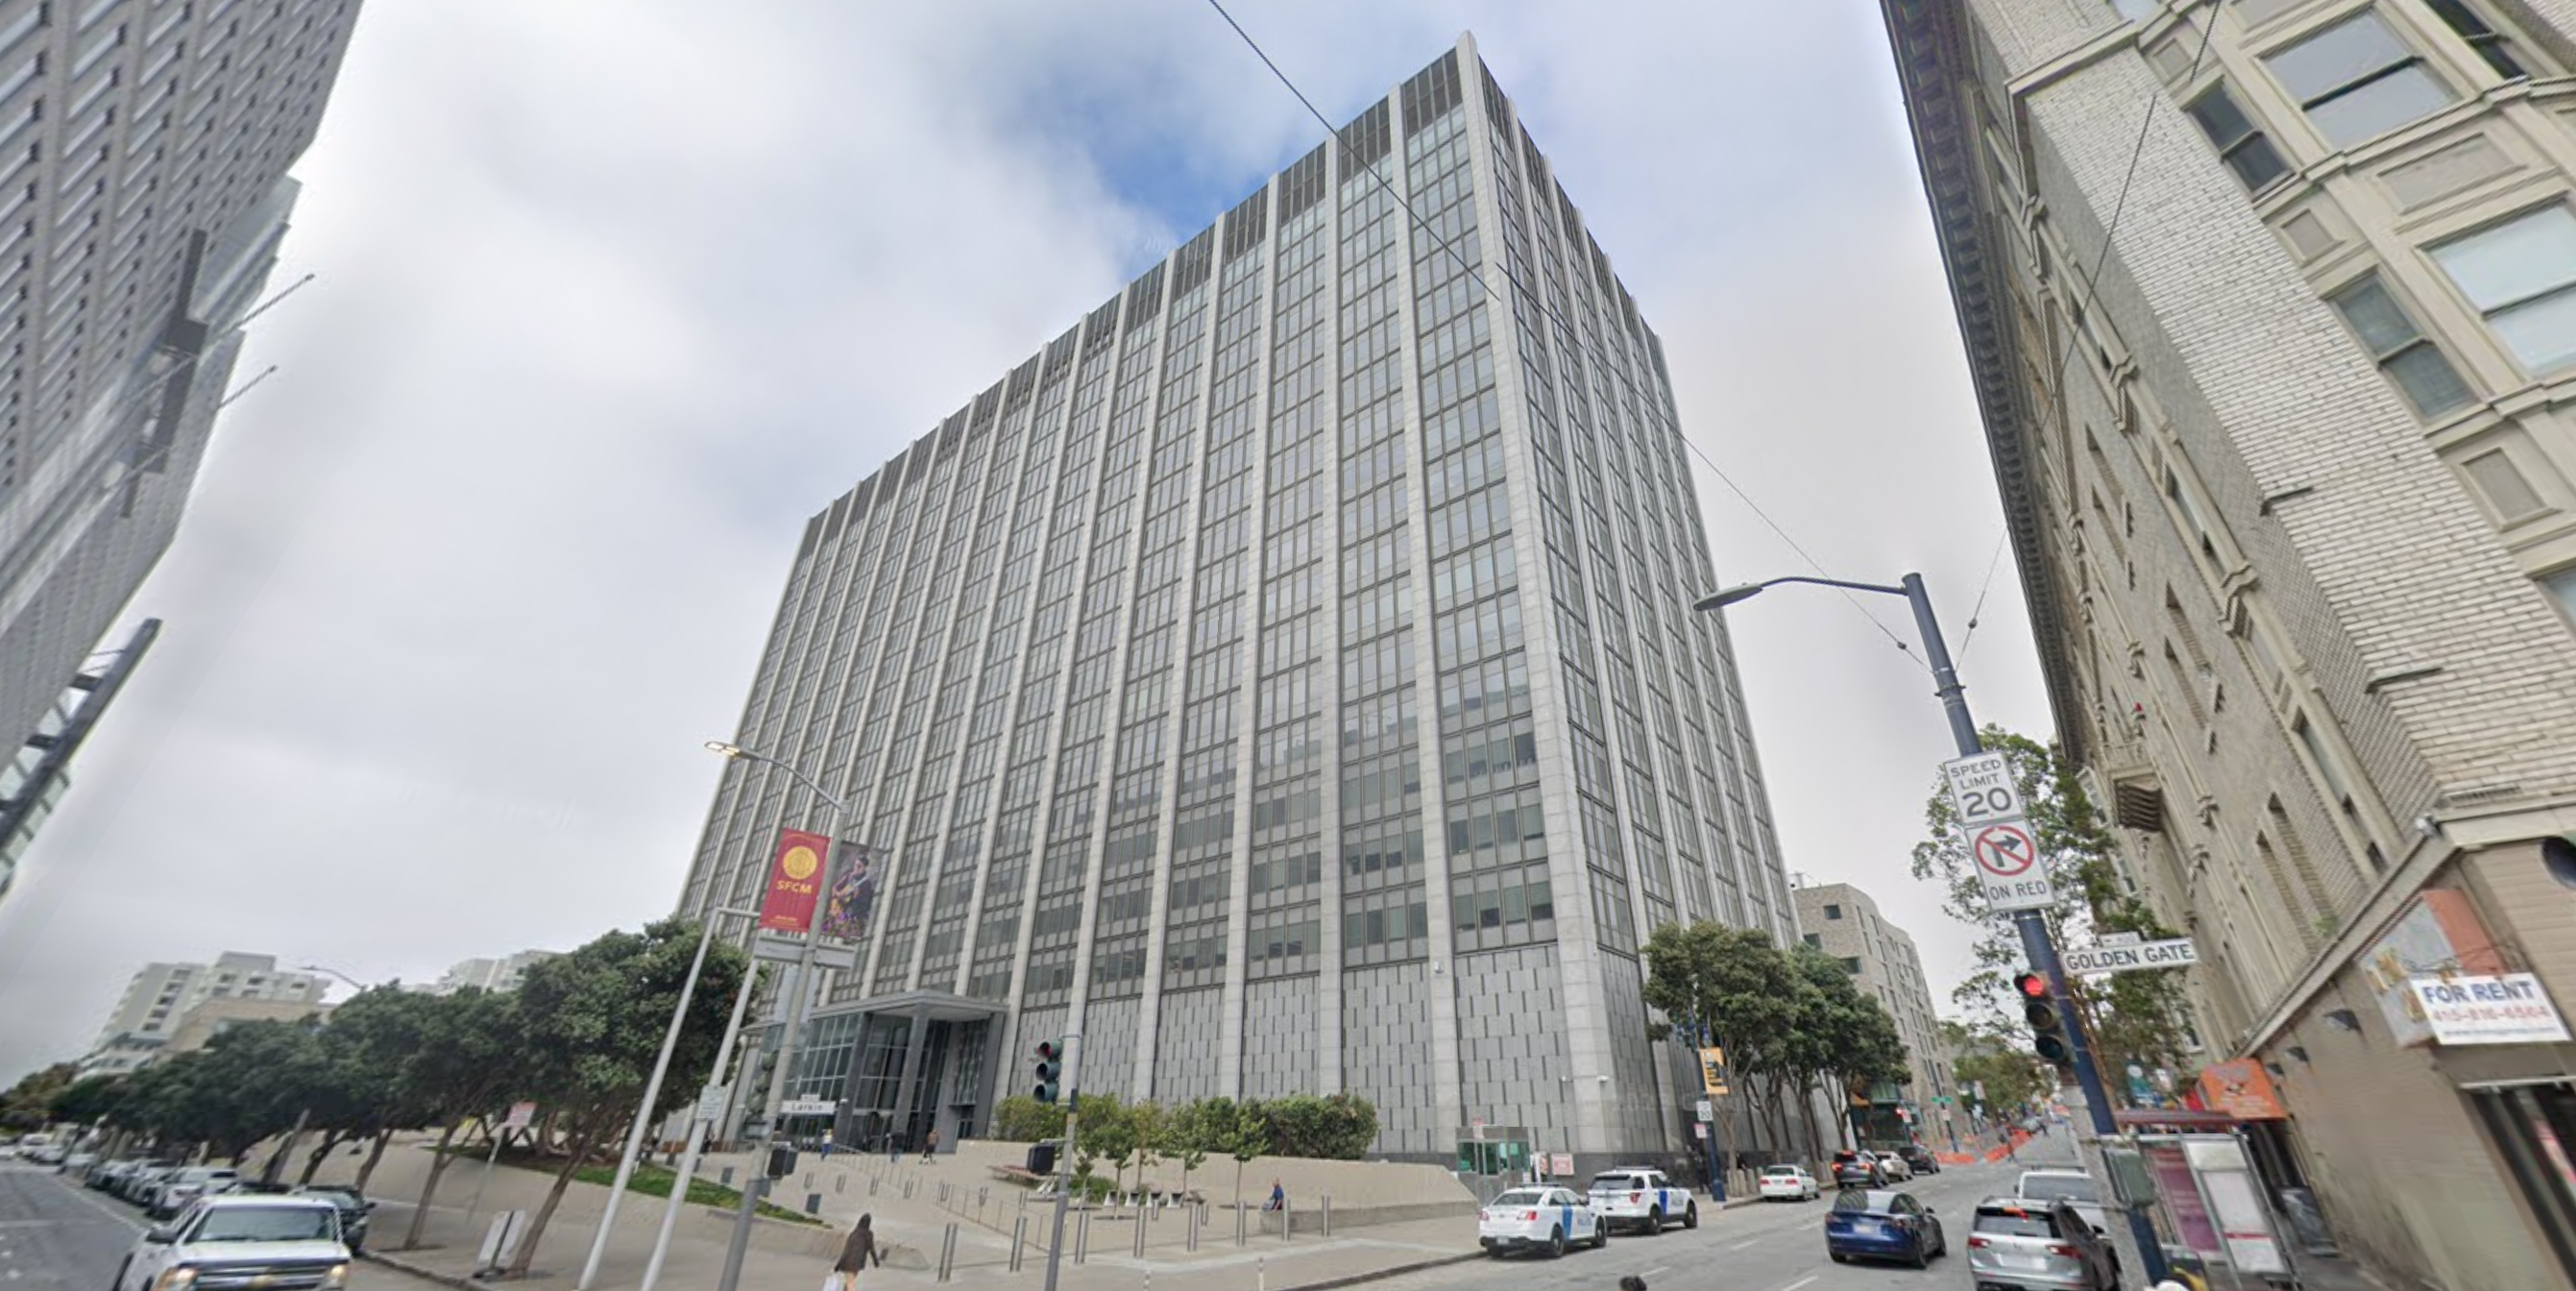 Two People Shot in Front of San Francisco Federal Building